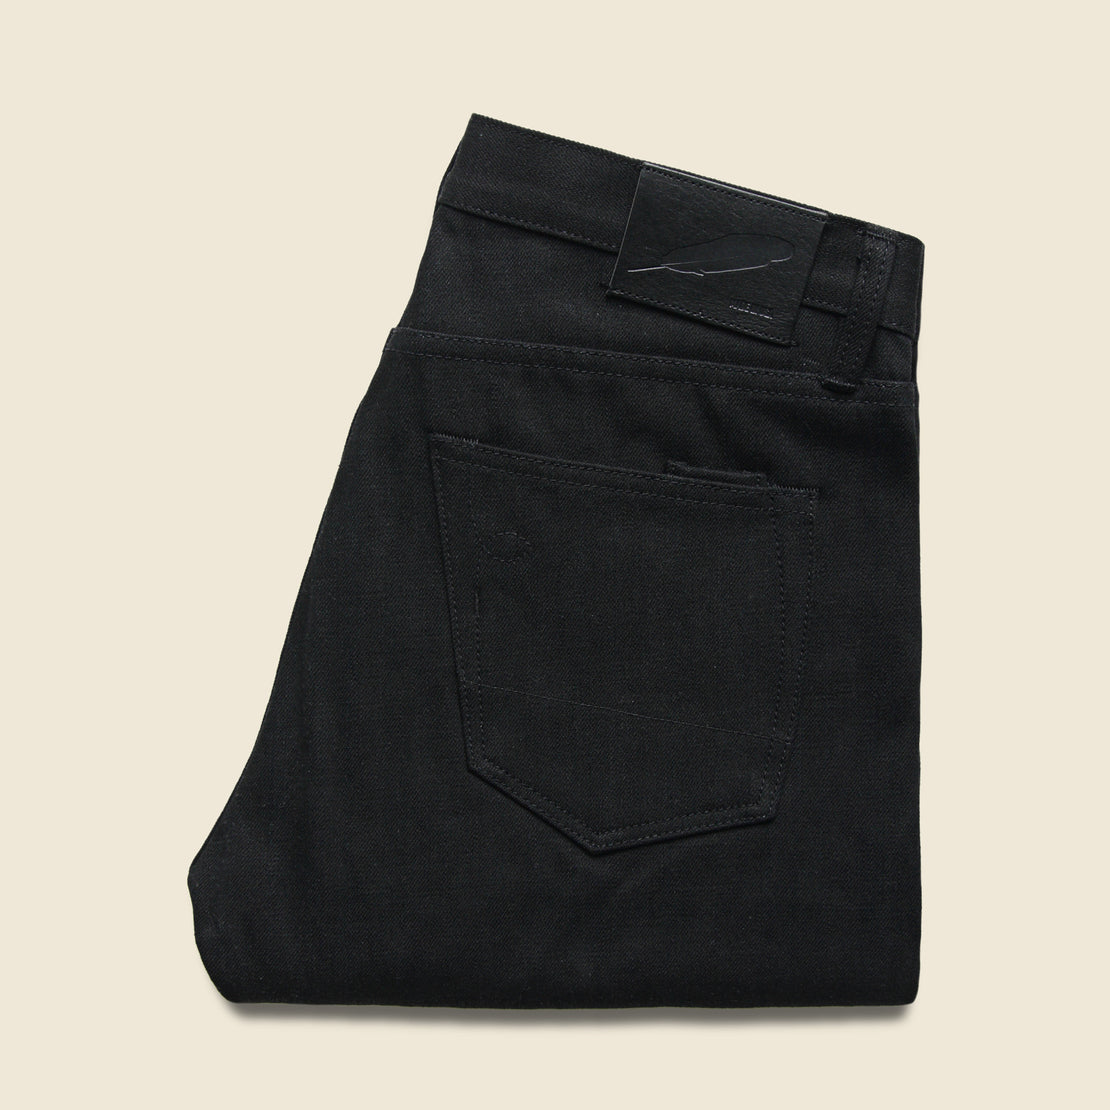 SK 15oz - Stealth Black - Rogue Territory - STAG Provisions - Pants - Denim